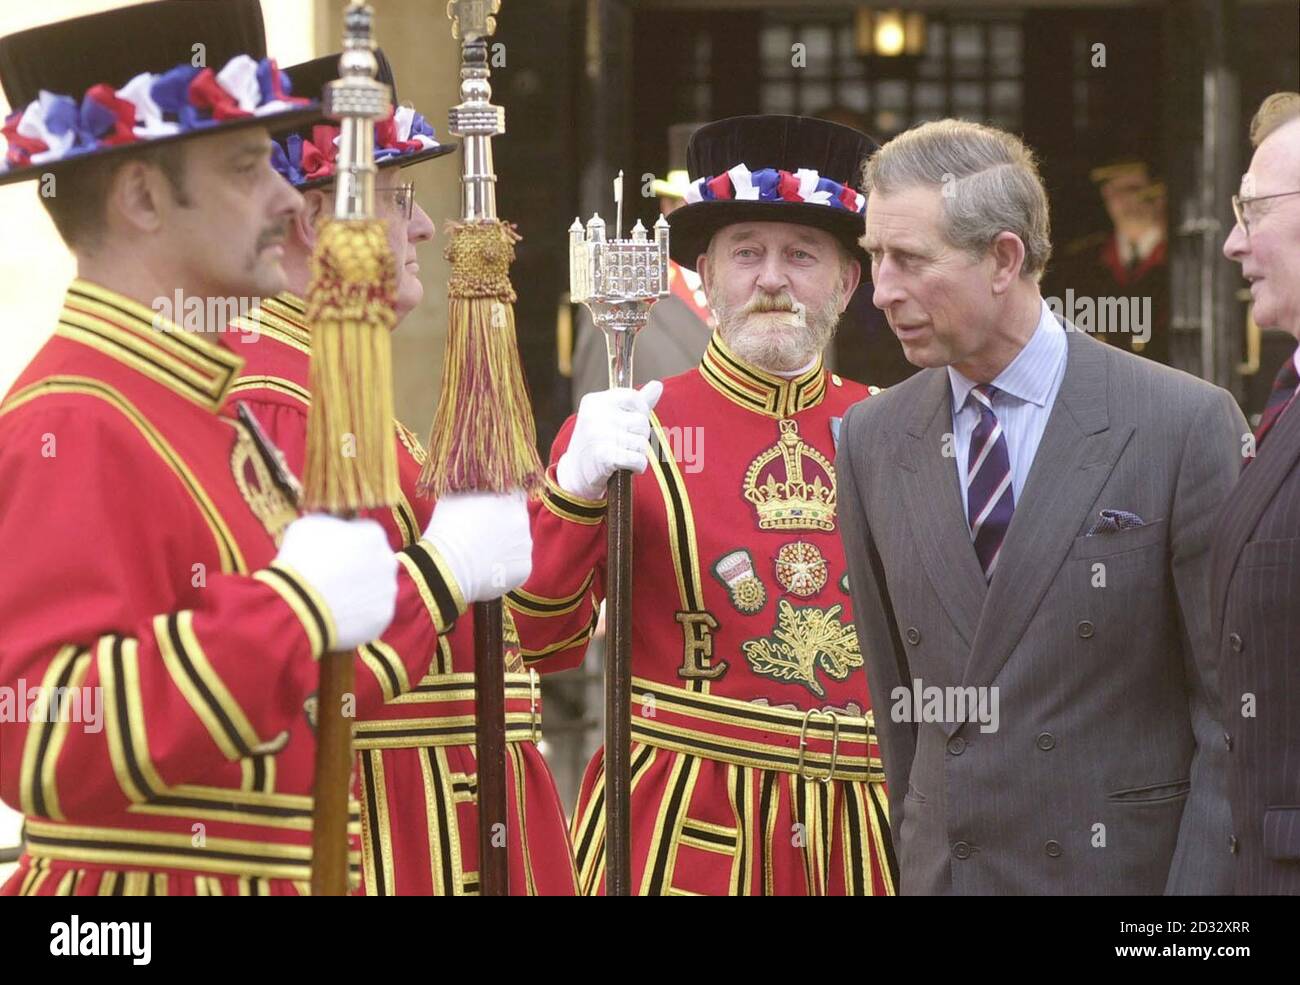 The Prince of Wales is introduced to two Beefeaters by the Chief Yeoman Warder Tom Sharp (centre) during a visit to the Tower of London.   *  As patron of the charity Age Concern, the Prince later backed a drive to beat age discrimination in the workplace when he told around 20 company managers and directors gathered at a reception in Tower Hill, London, that he had noticed about 15 years ago that workforces were getting younger. Stock Photo